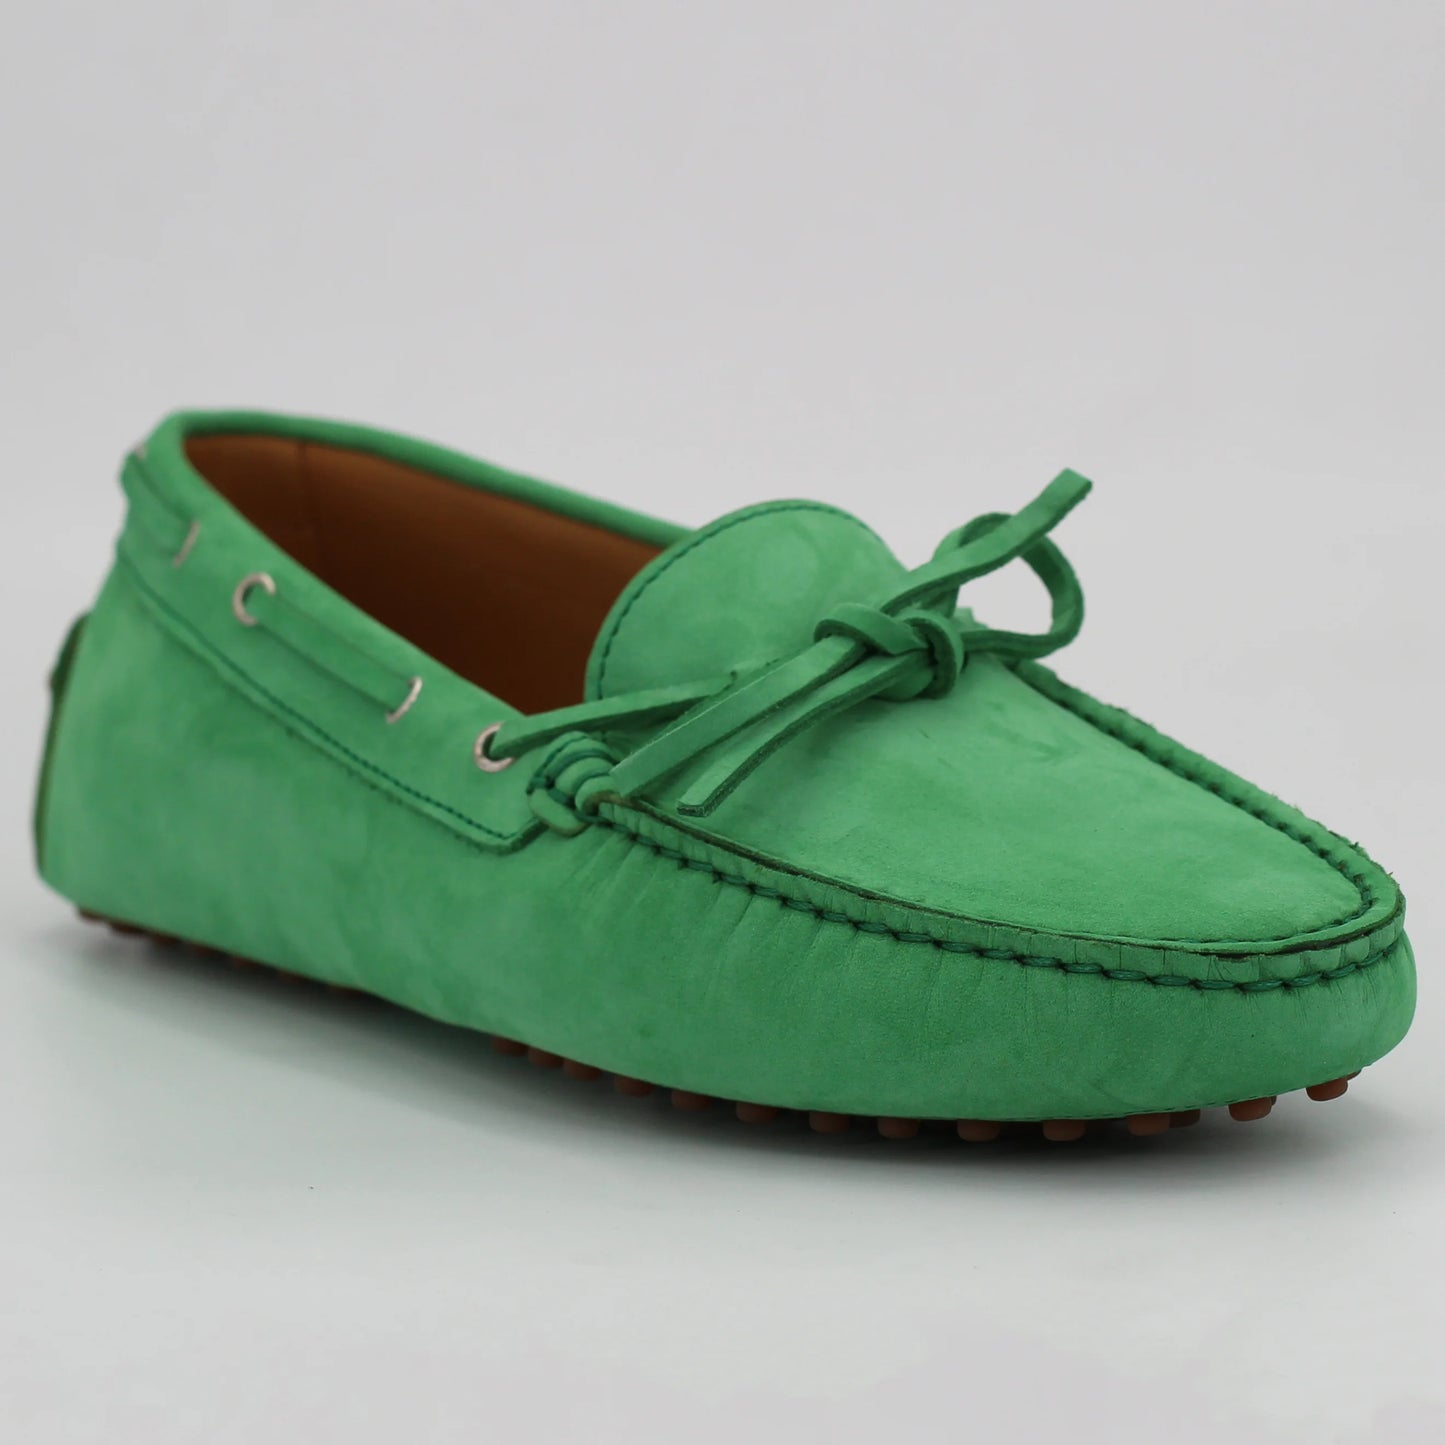 Shop Handmade Italian Leather moccasin in green (COND04011) or browse our range of hand-made Italian shoes in leather or suede in-store at Aliverti Cape Town, or shop online. We deliver in South Africa & offer multiple payment plans as well as accept multiple safe & secure payment methods.